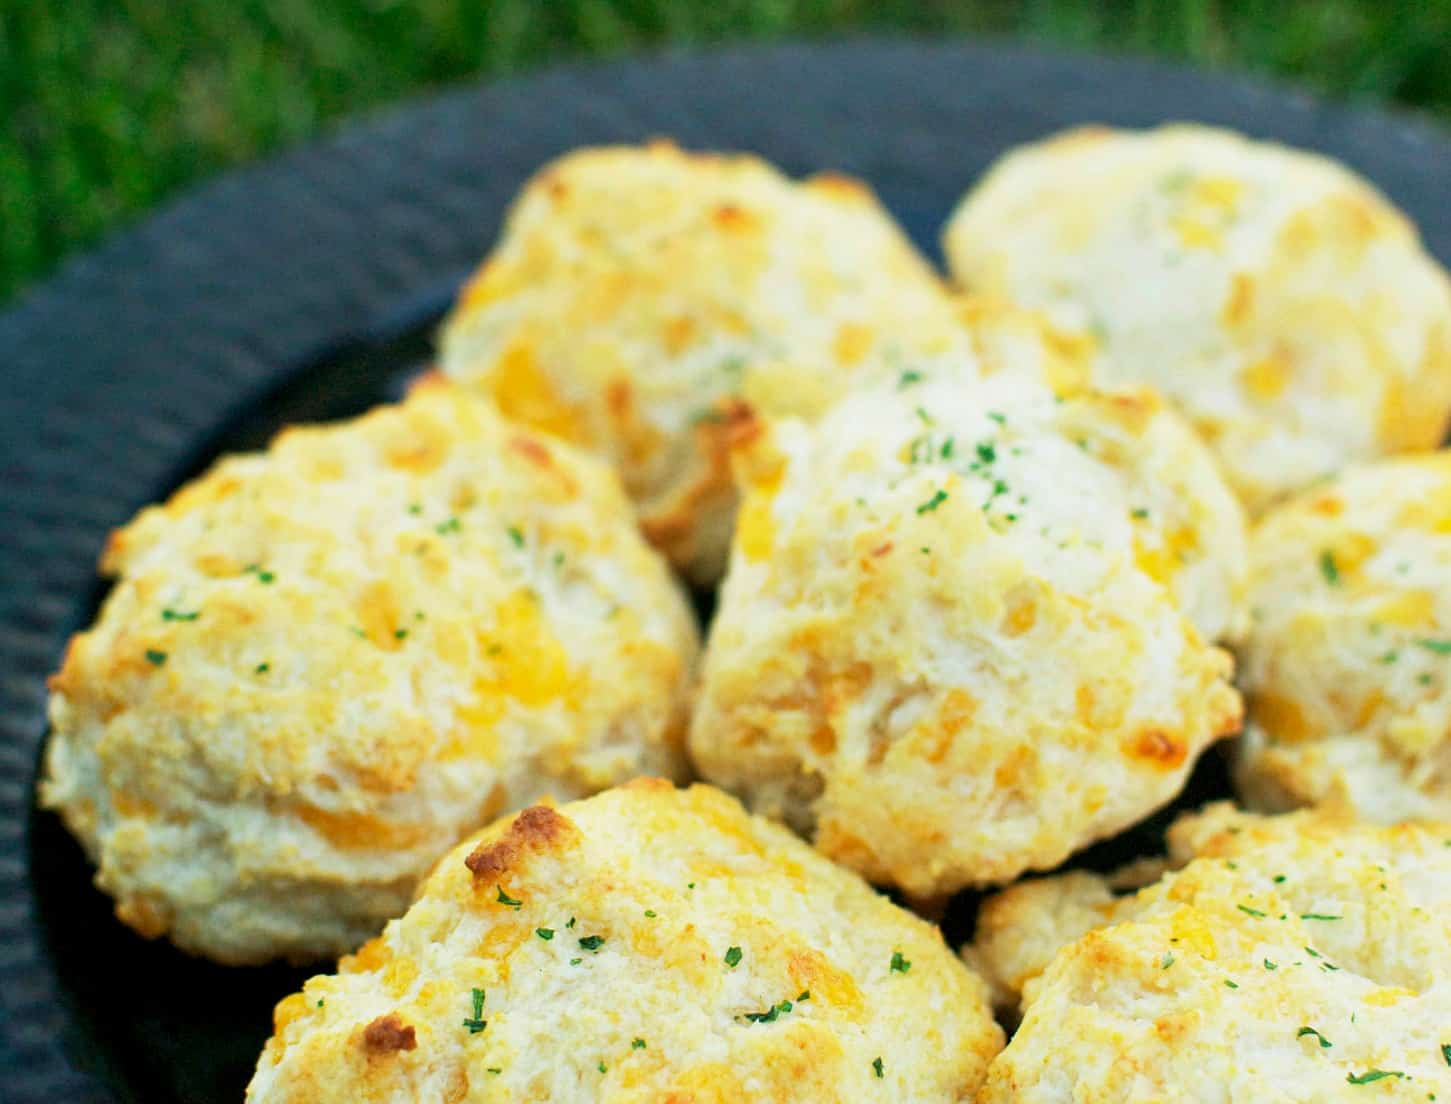 https://www.cupcakediariesblog.com/wp-content/uploads/2013/08/red_lobster_biscuits.jpg